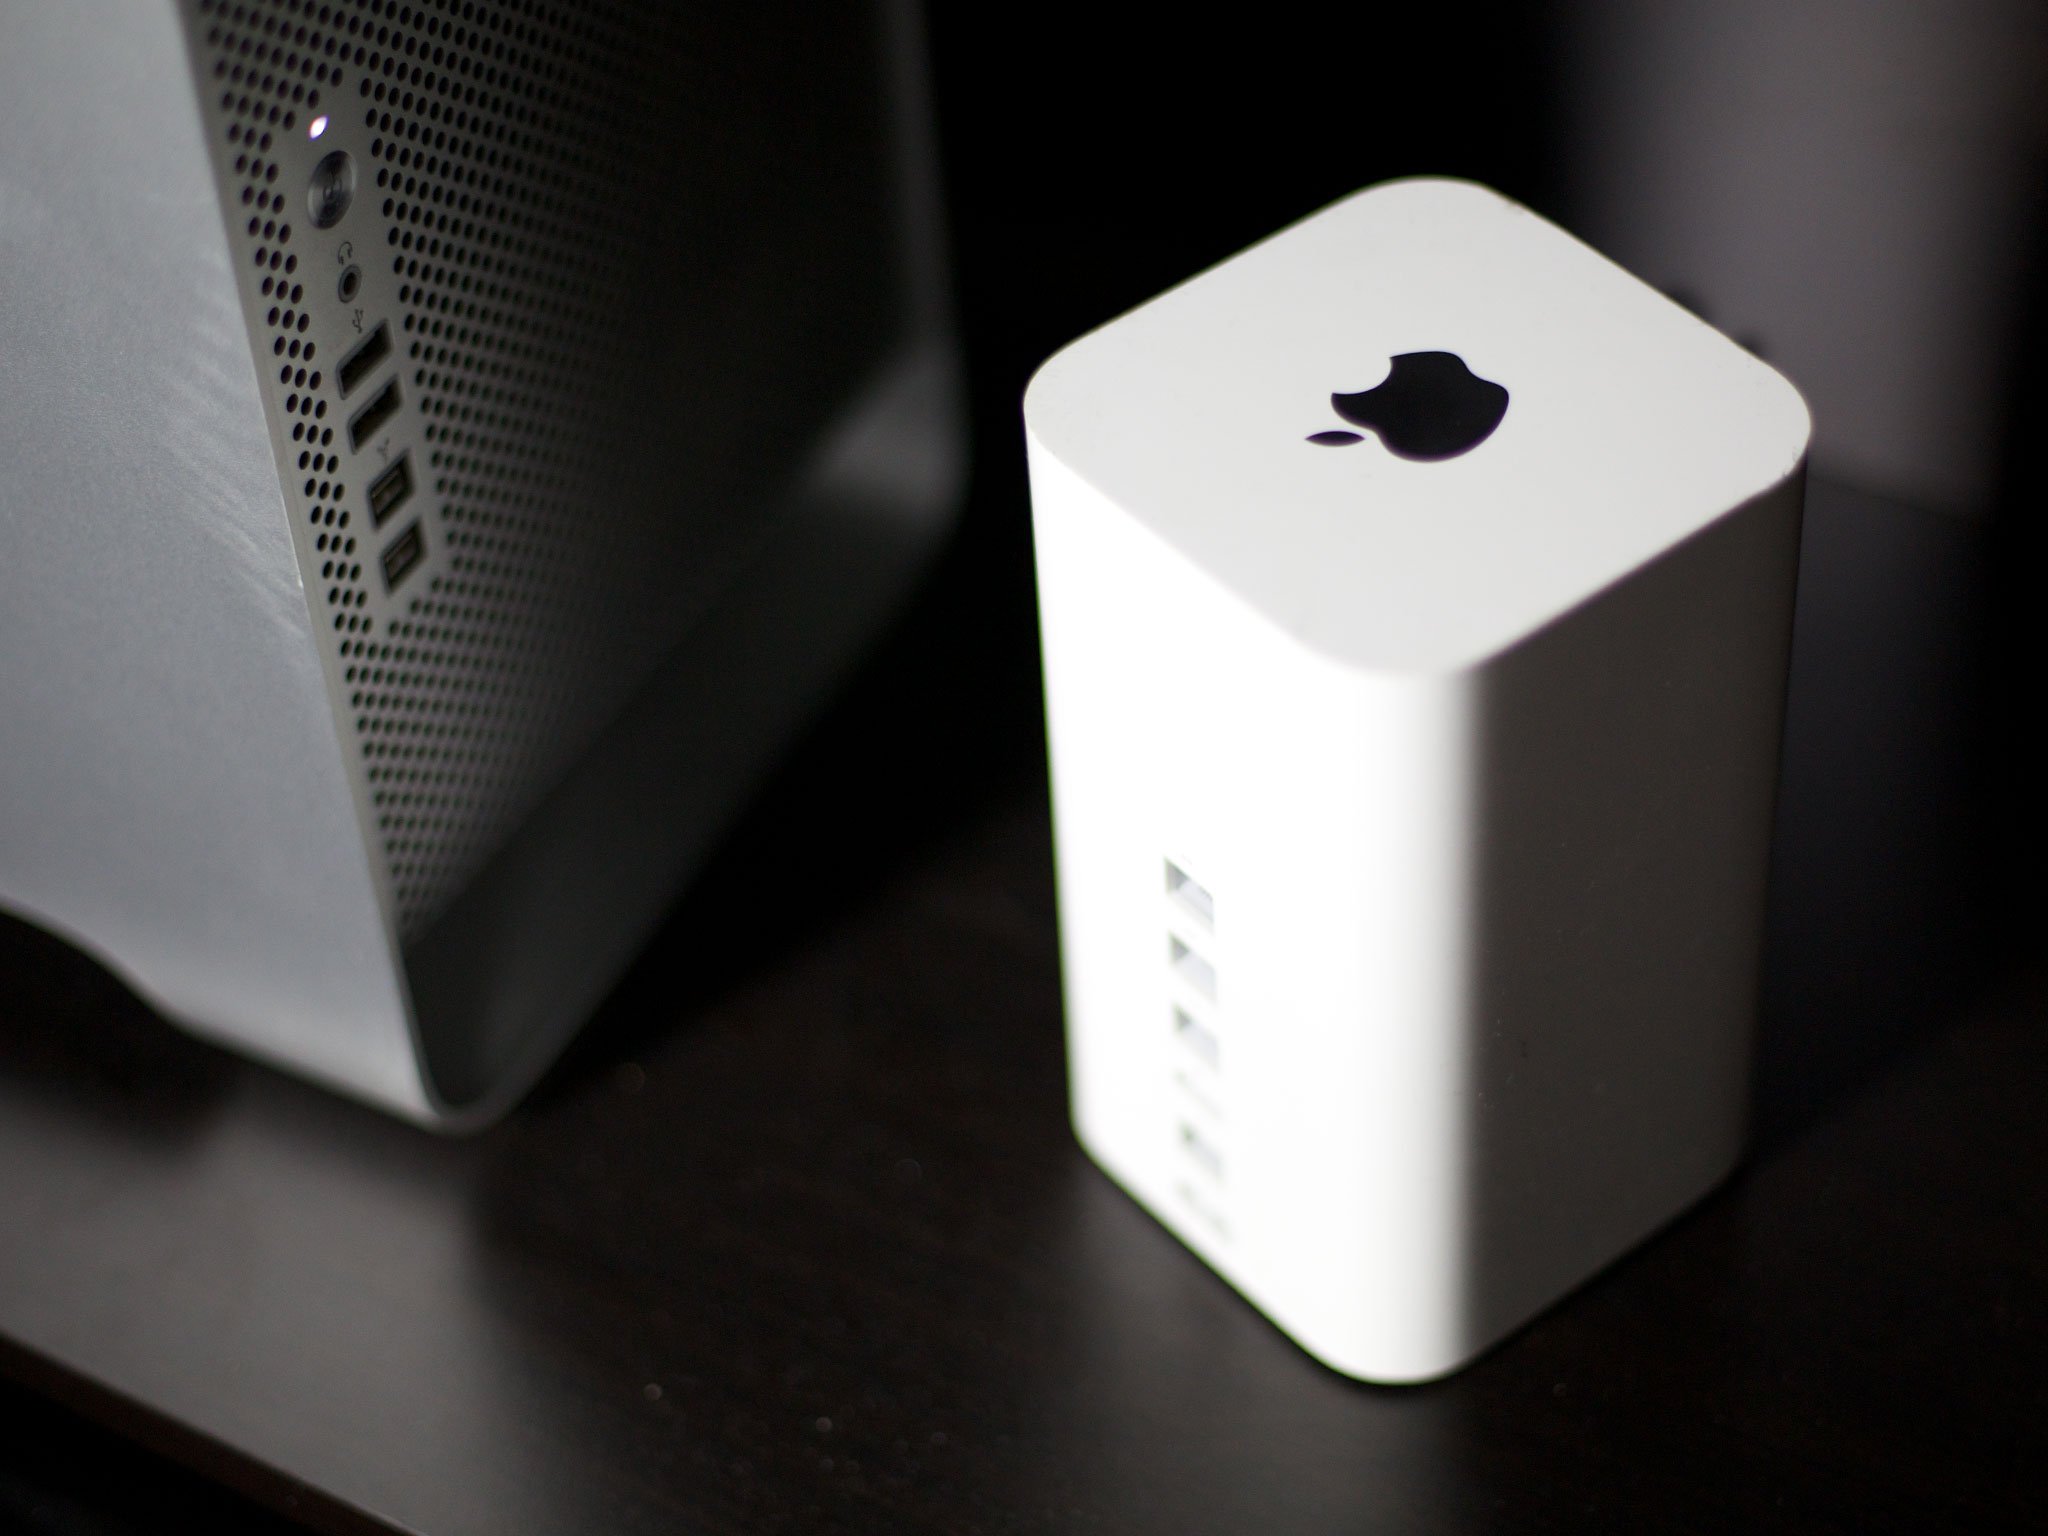 Apple reportedly pulls AirPort Extreme and Time Capsule from U.S. stores